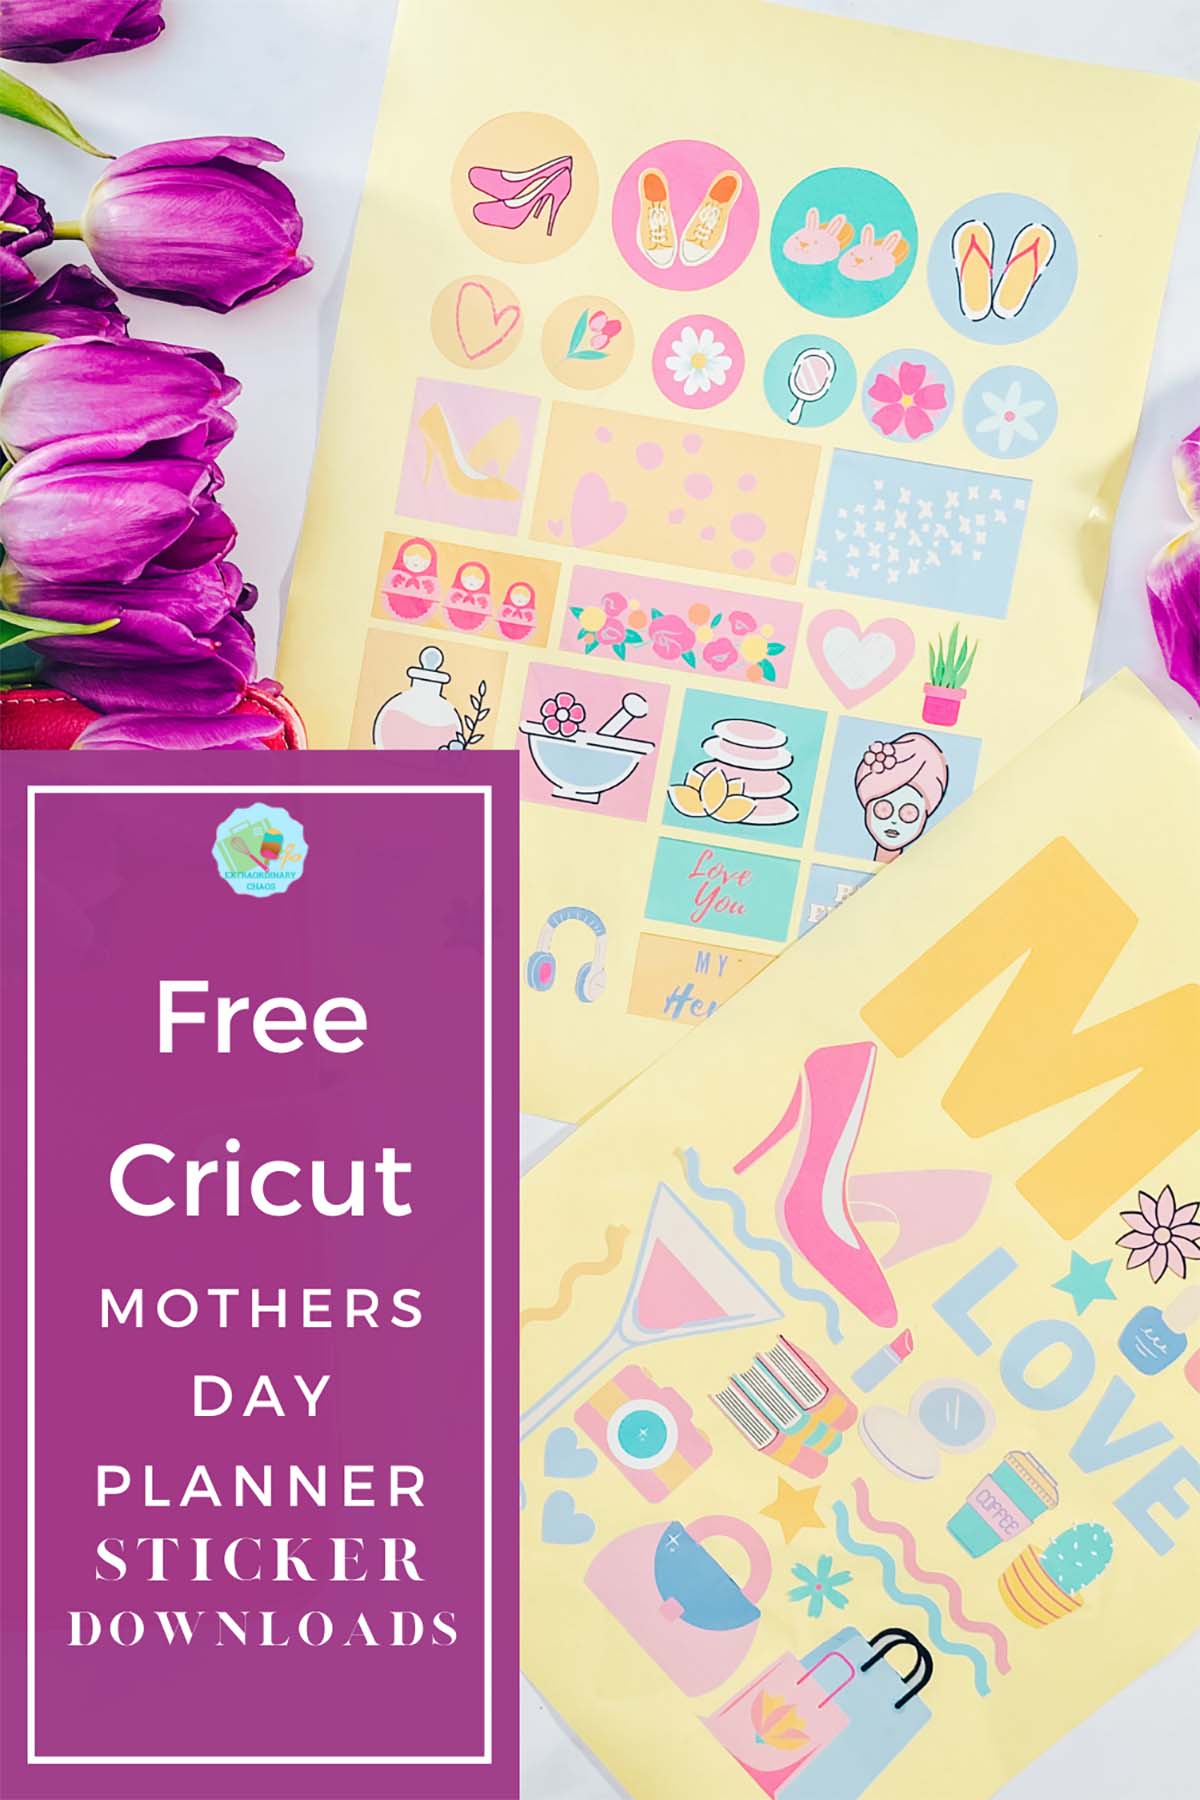 Free download for a Cricut Mothers Day Planner and bullet journal Stickers